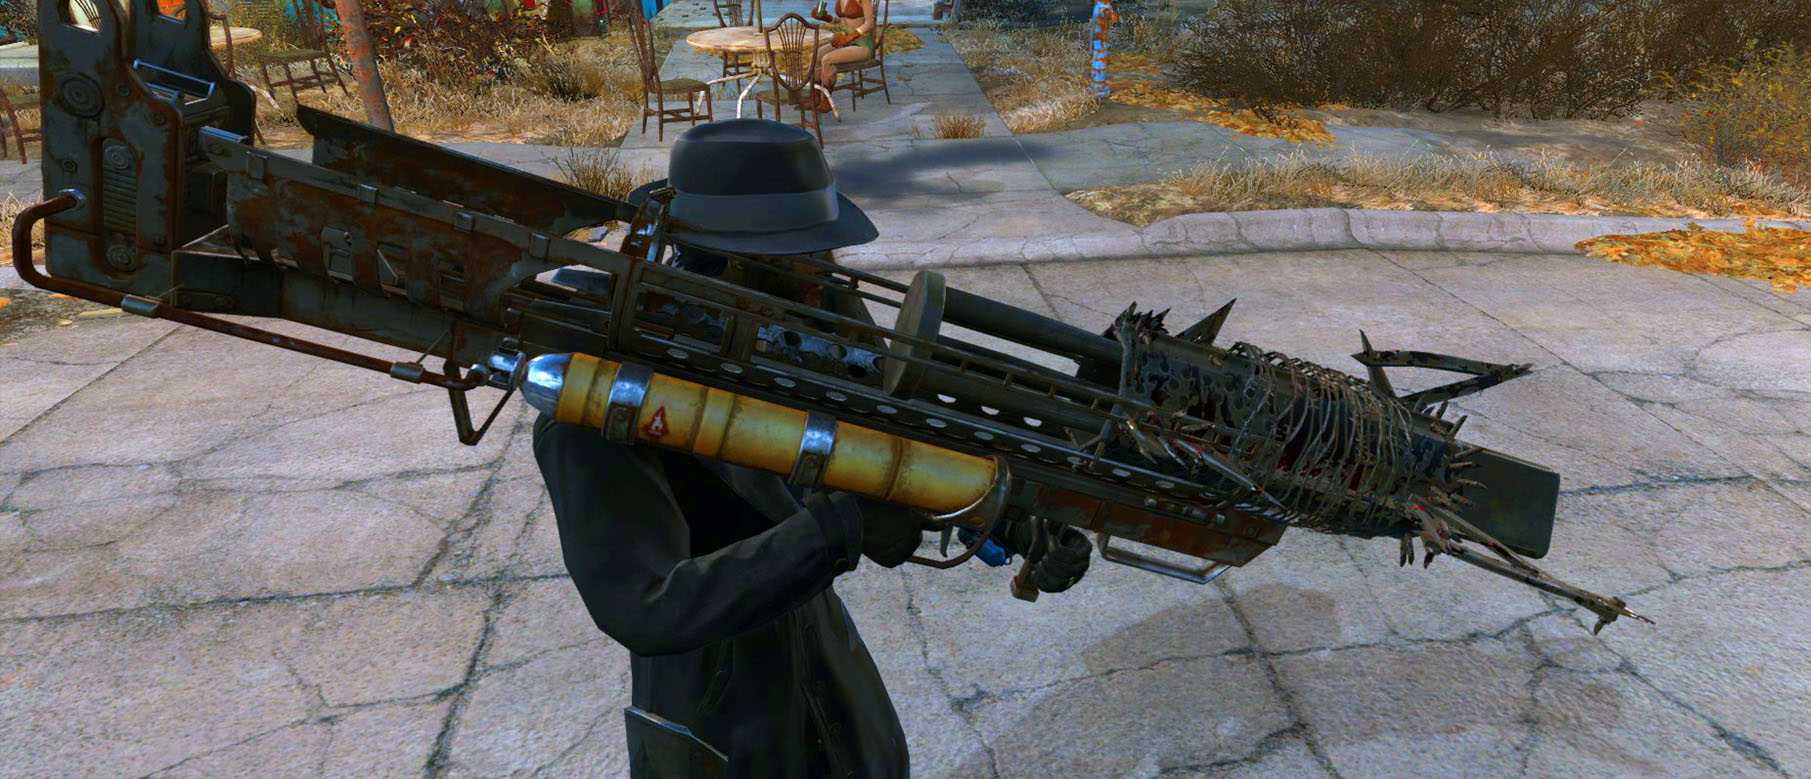 Fallout 4 weapons all in one фото 23